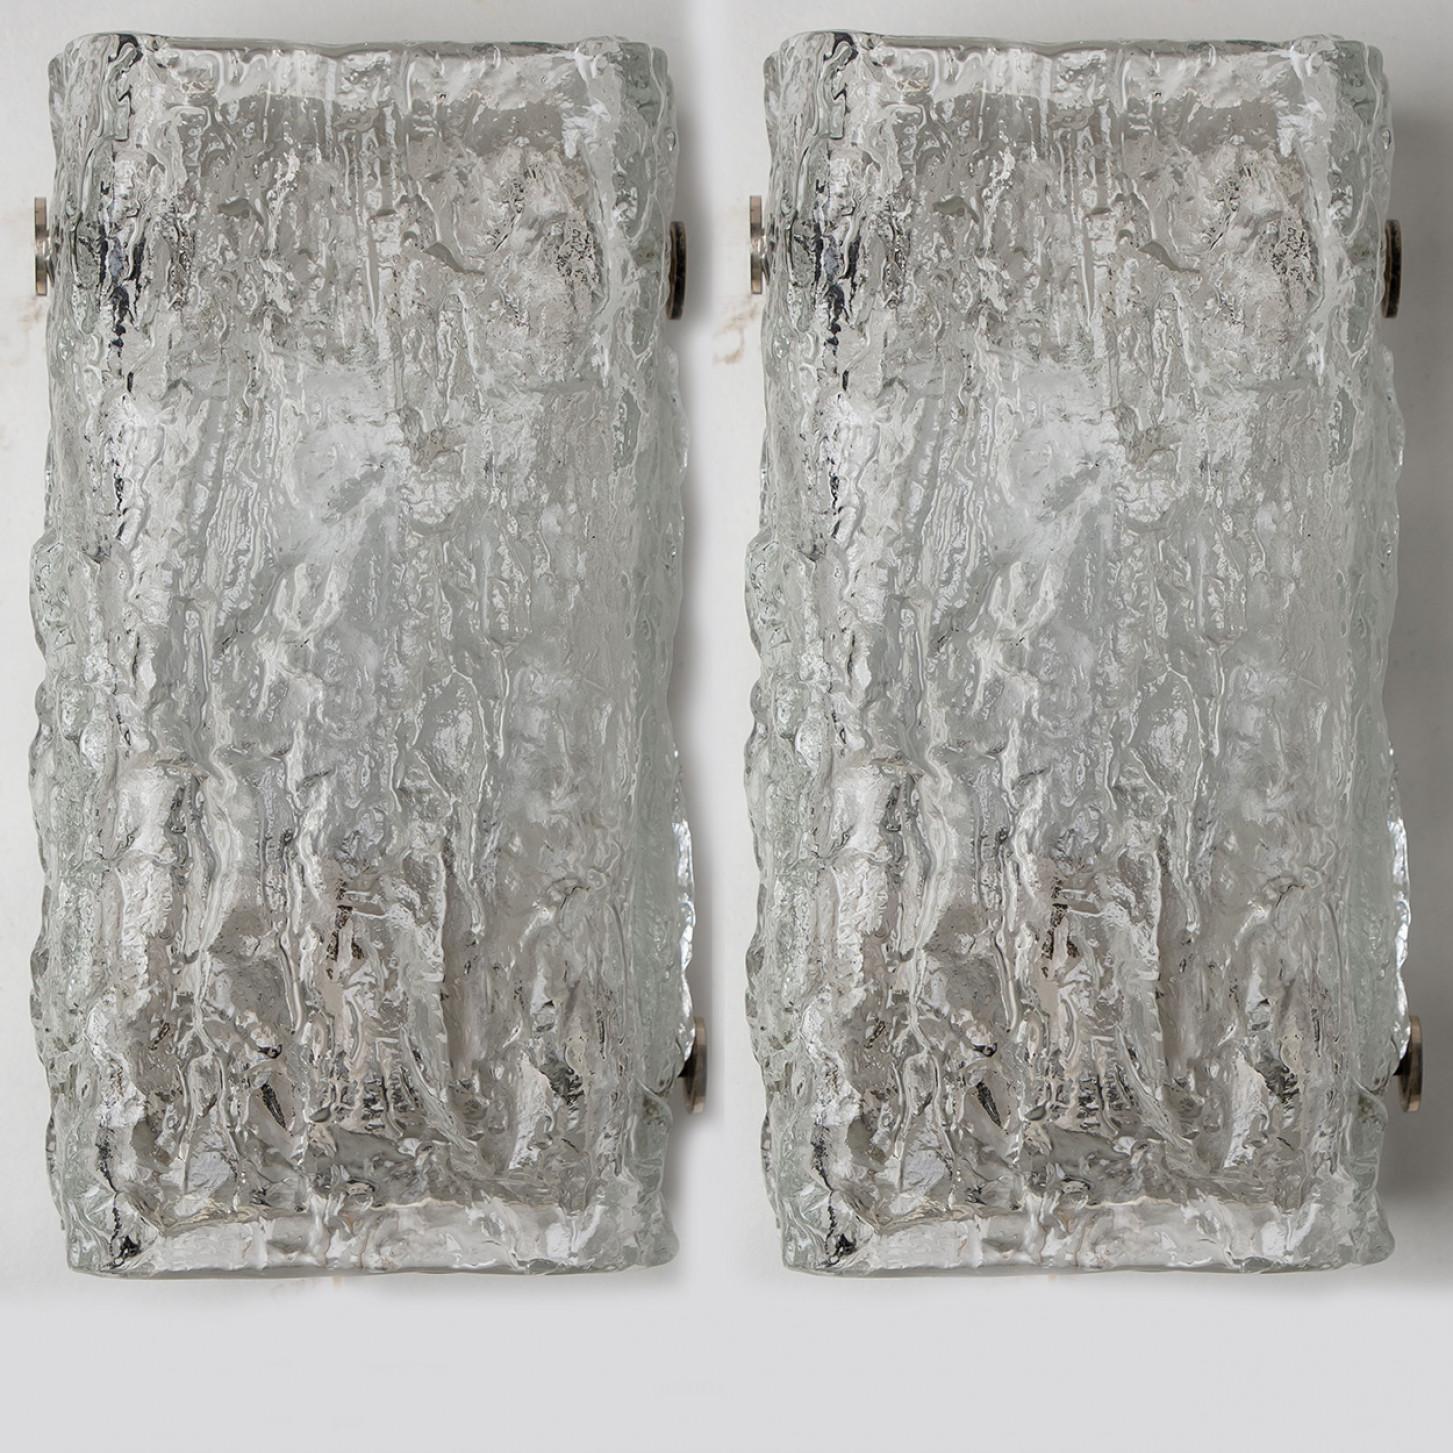 A pair of beautiful high quality light fixture made by Kalmar, Austria. Manufactured in mid century, circa 1970 (at the end of 1960s and beginning of 1970s).

This wall light features lights made of handmade ice glass and silver back plate. The